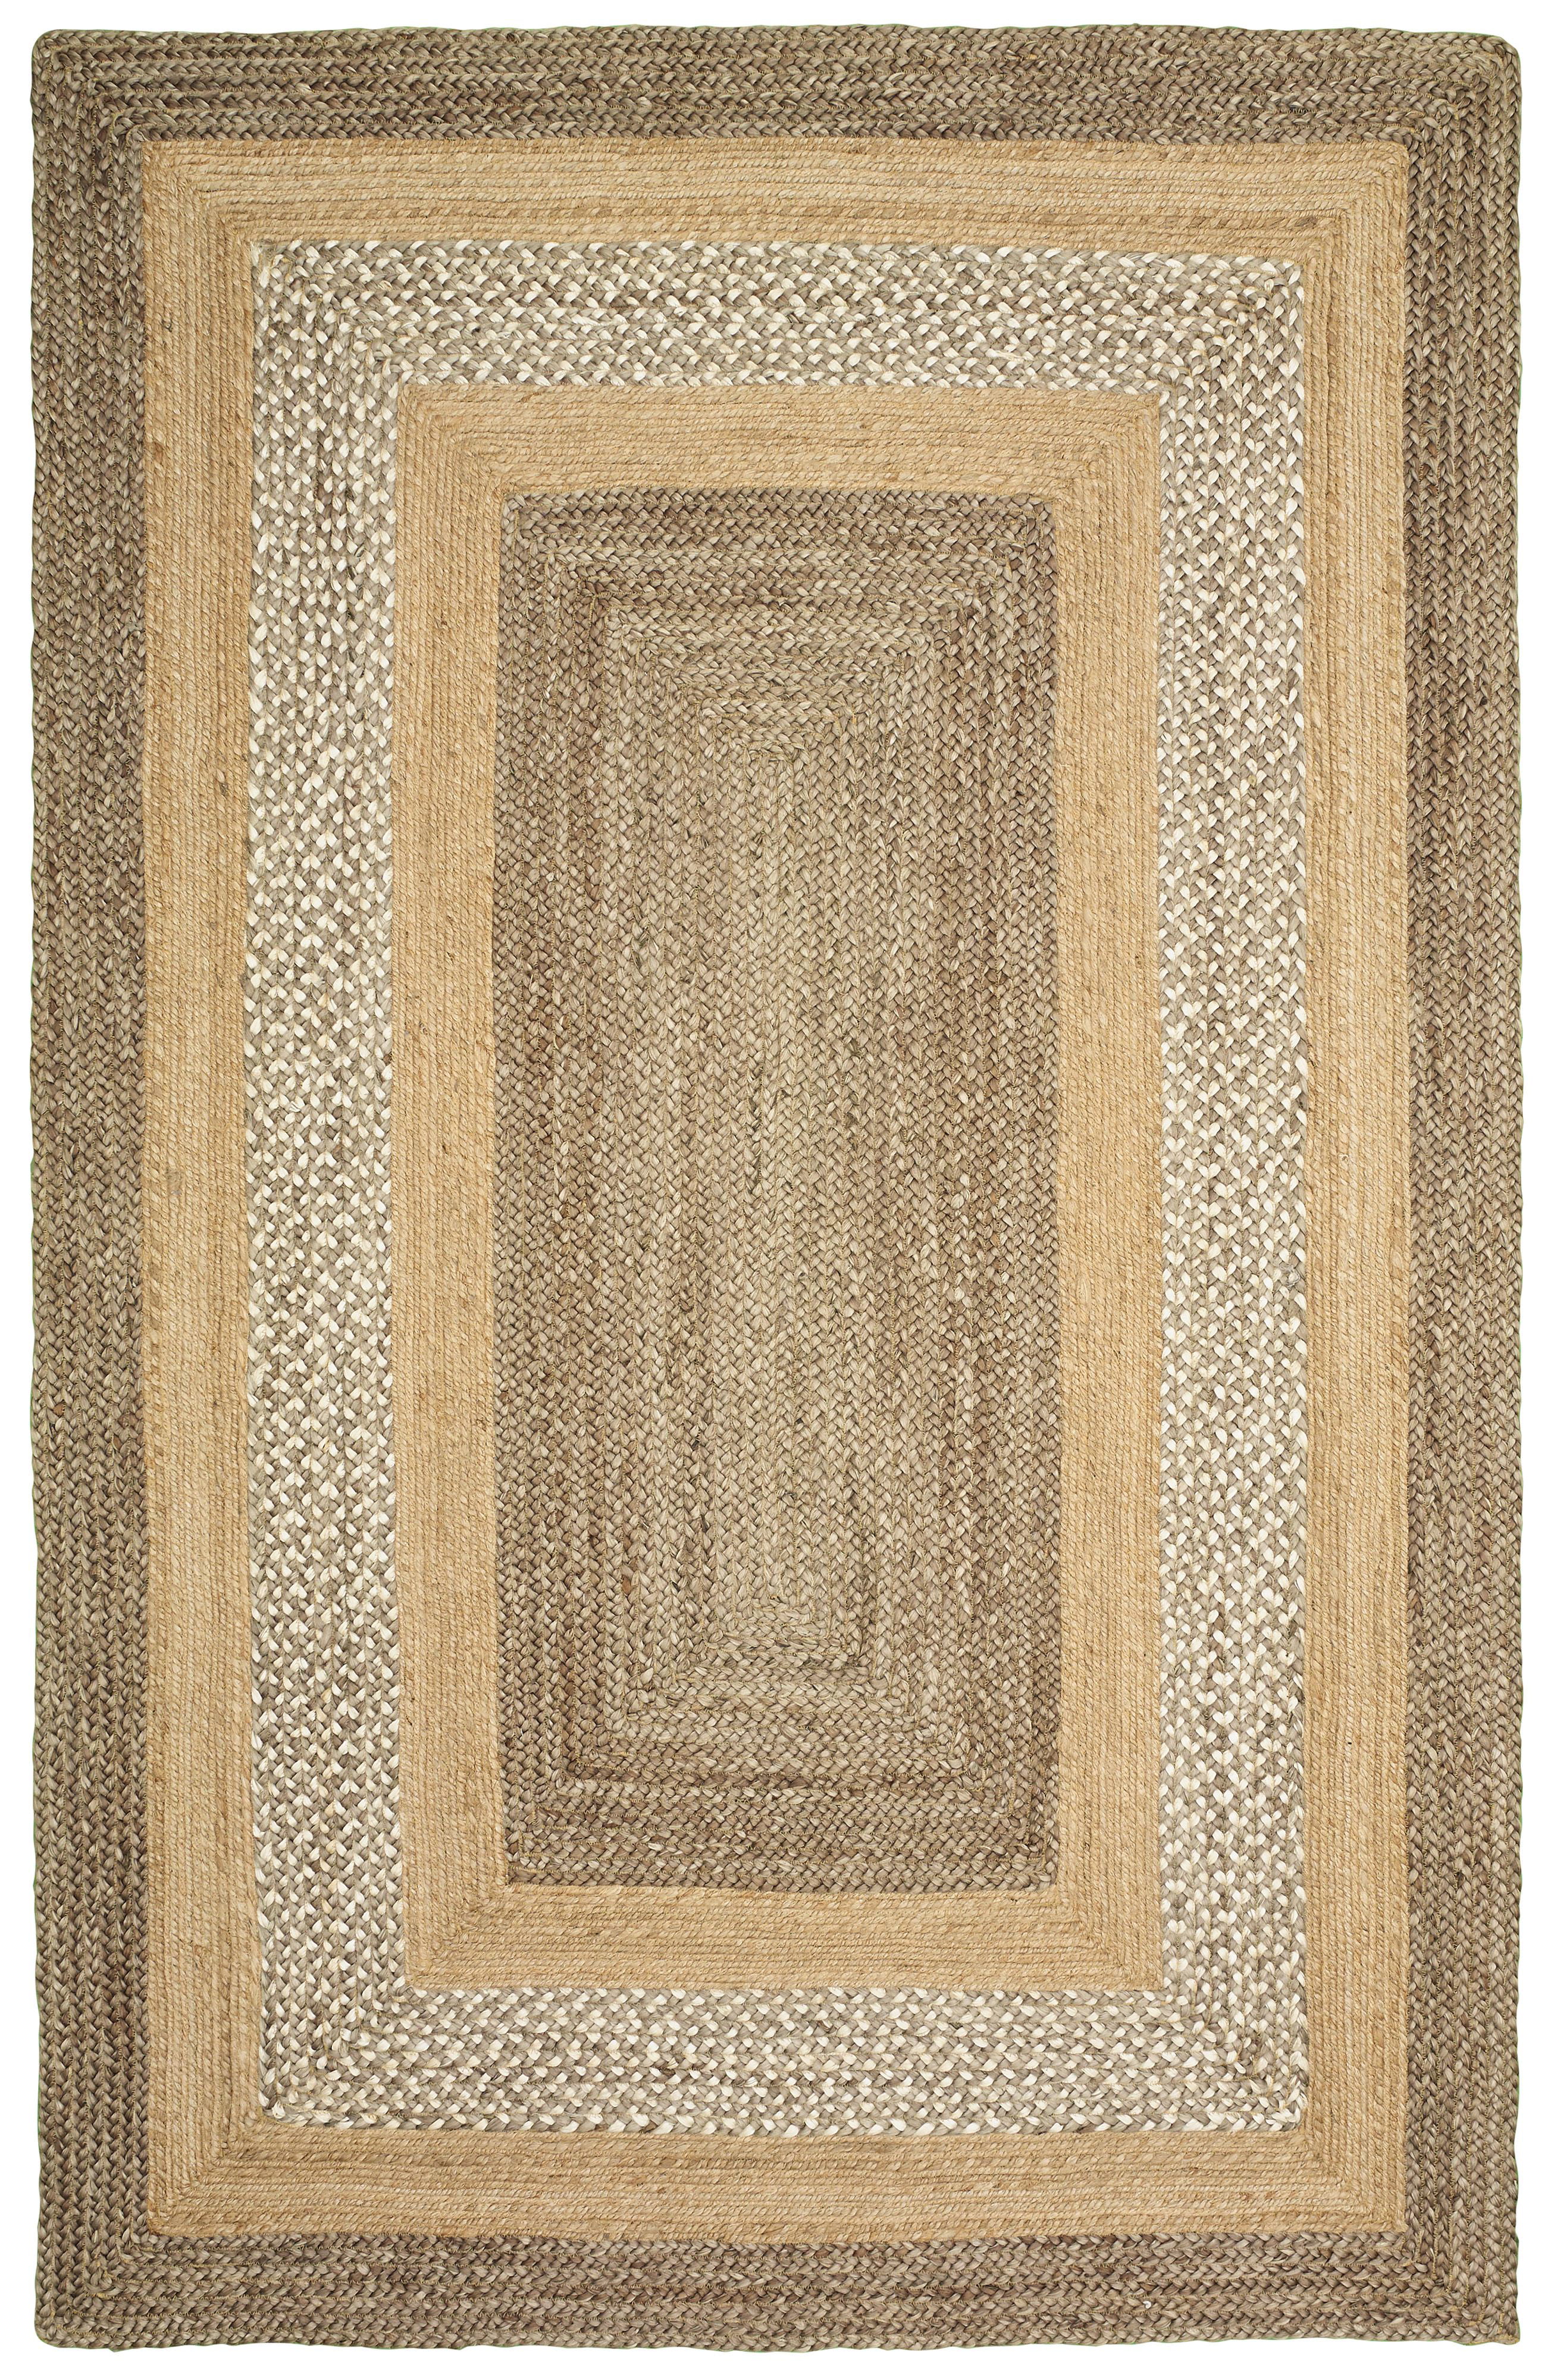 Lr Home Natural Jute Classic Braided Indoor Area Rug Natural/4' Round/Cottage/Round 